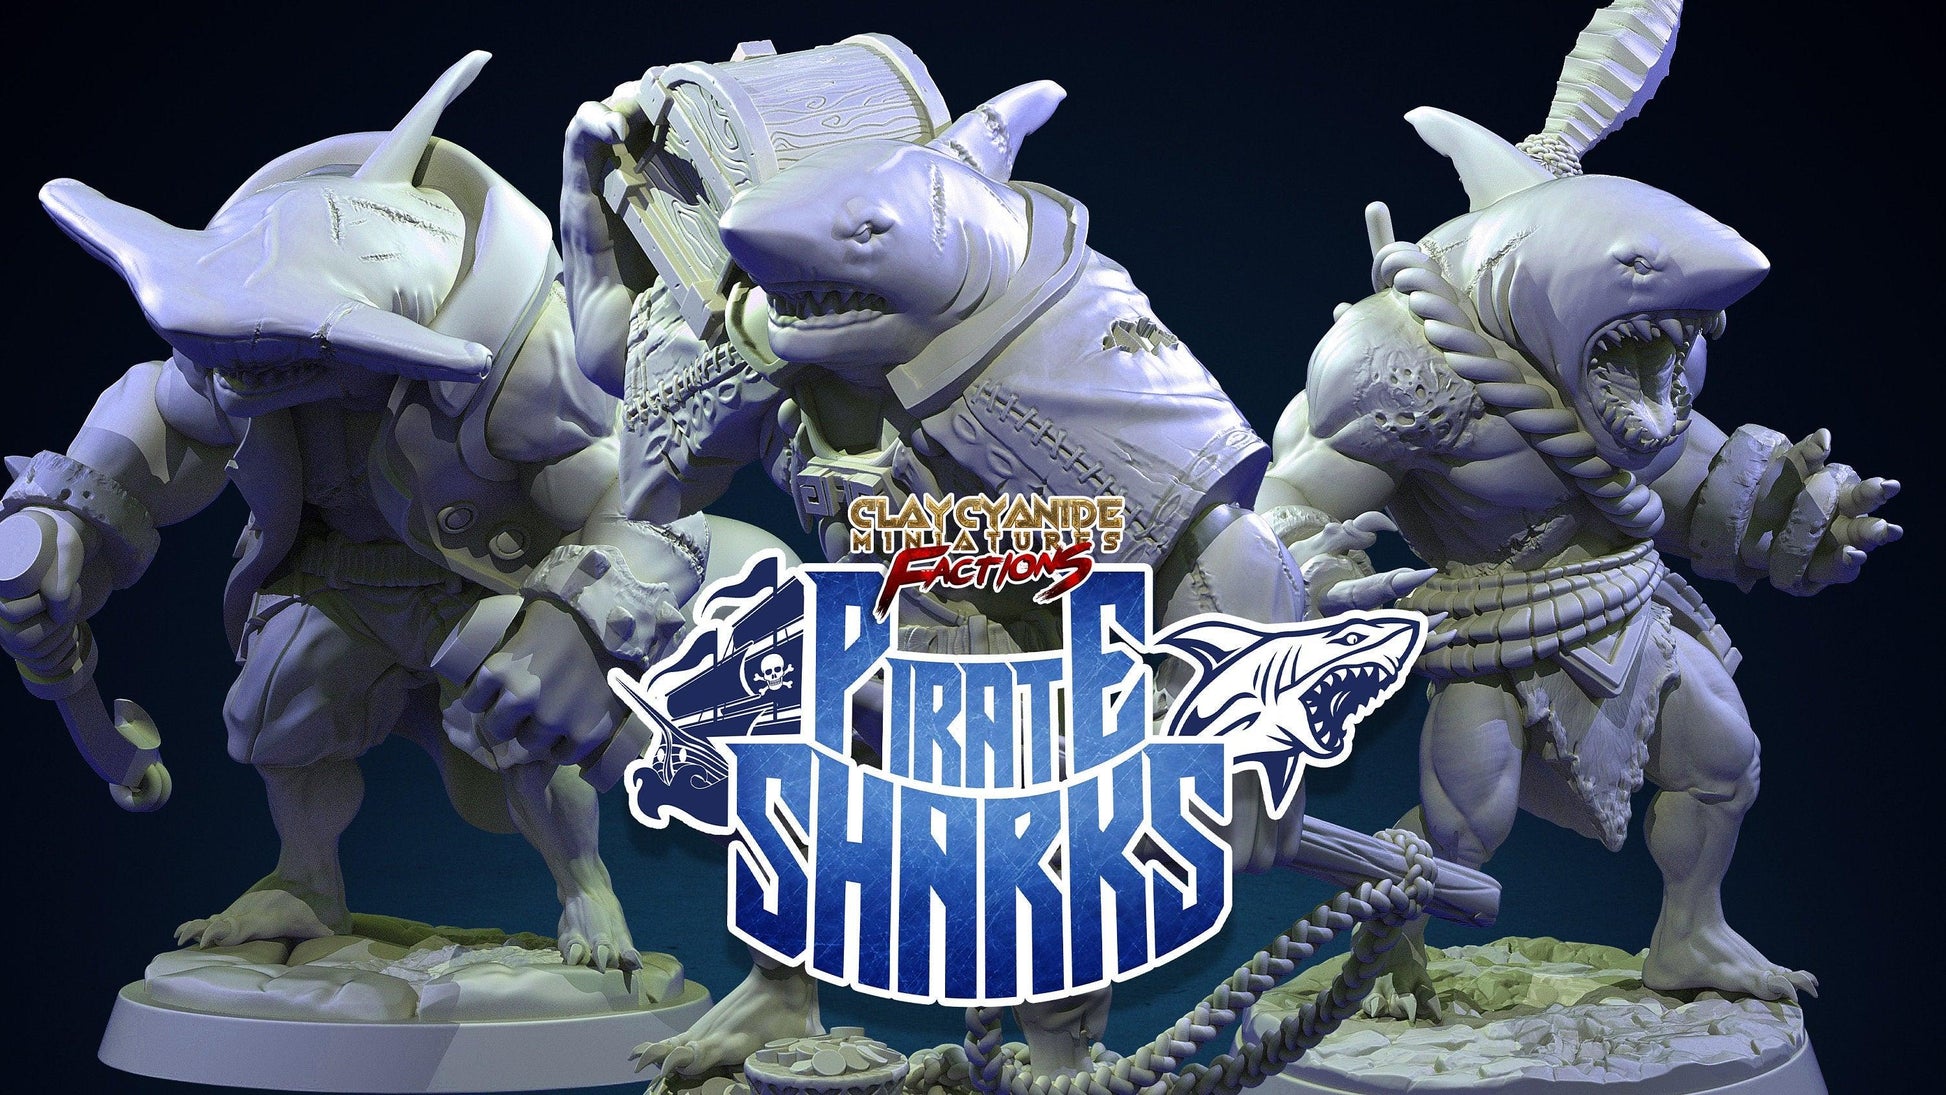 Harr, the Pirate Shark with a Harpoon and Treasure Chest Miniature | Aquatic DnD Miniature | Pirate Shark 32mm Scale - Plague Miniatures shop for DnD Miniatures